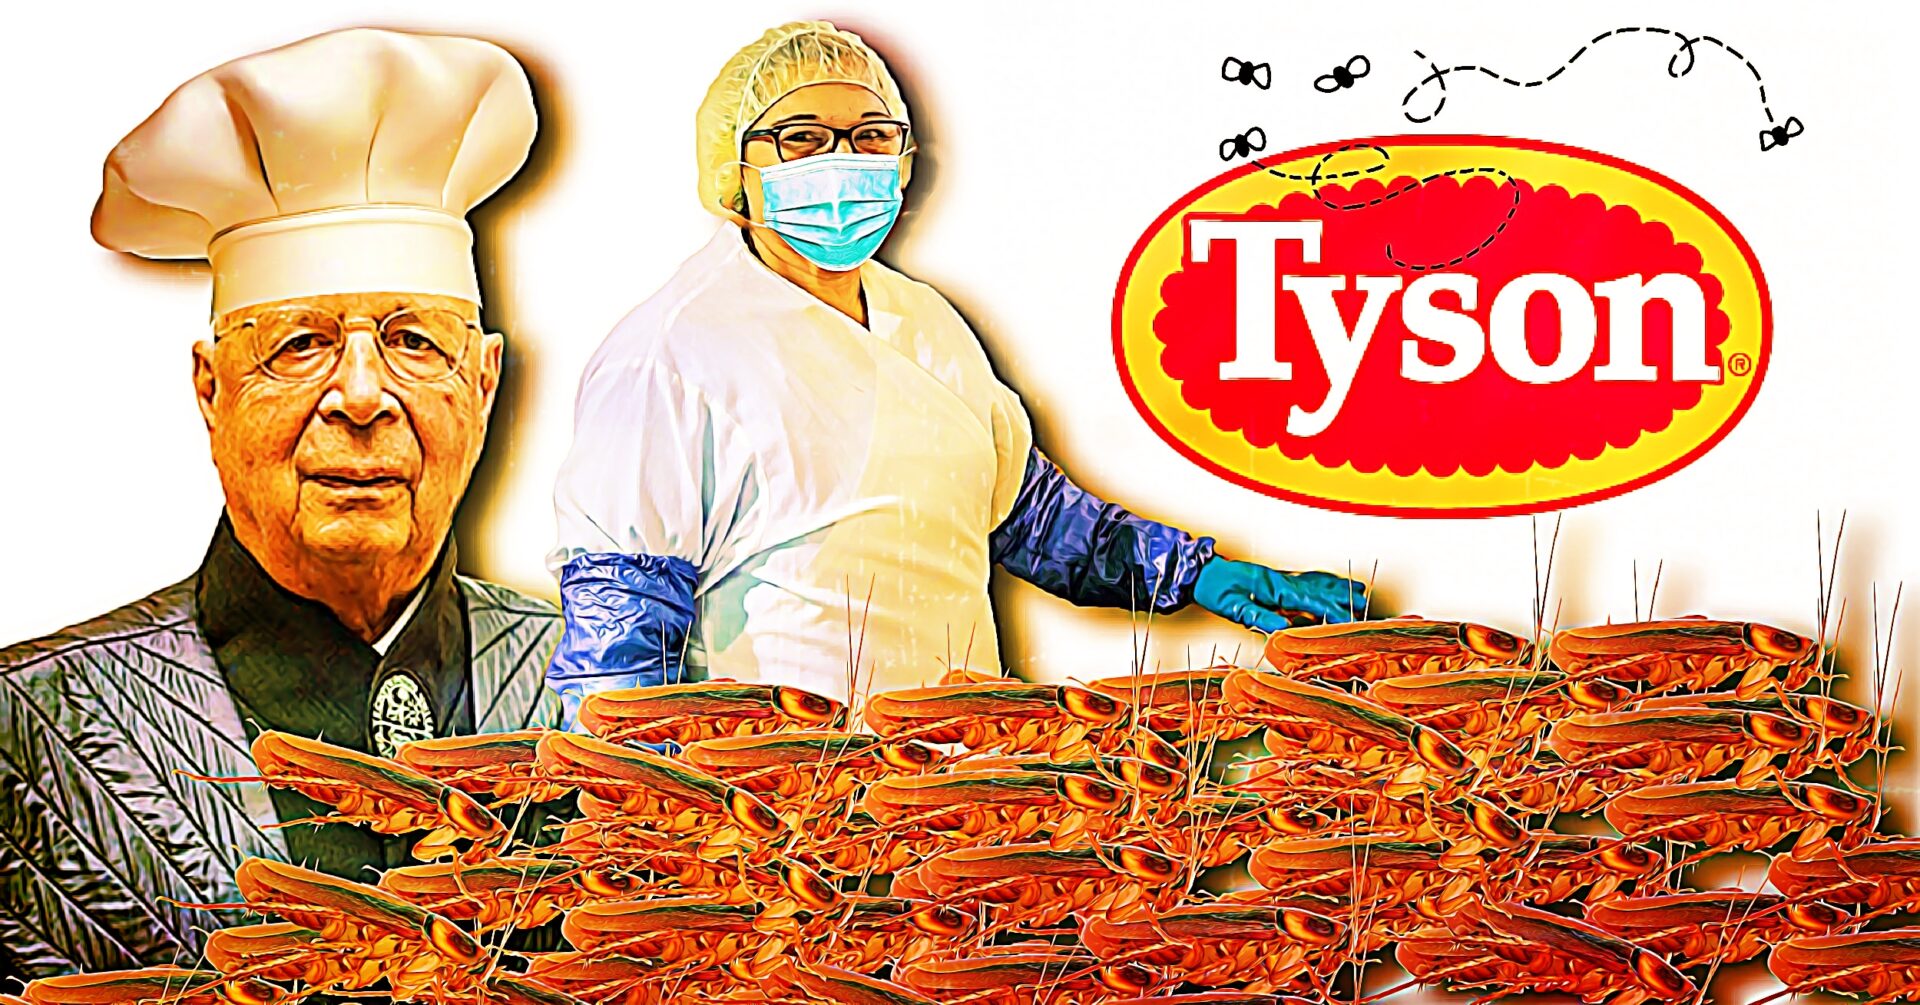 Tyson Foods teams up with the World Economic Forum to open an "insect" processing plant... - Revolver News